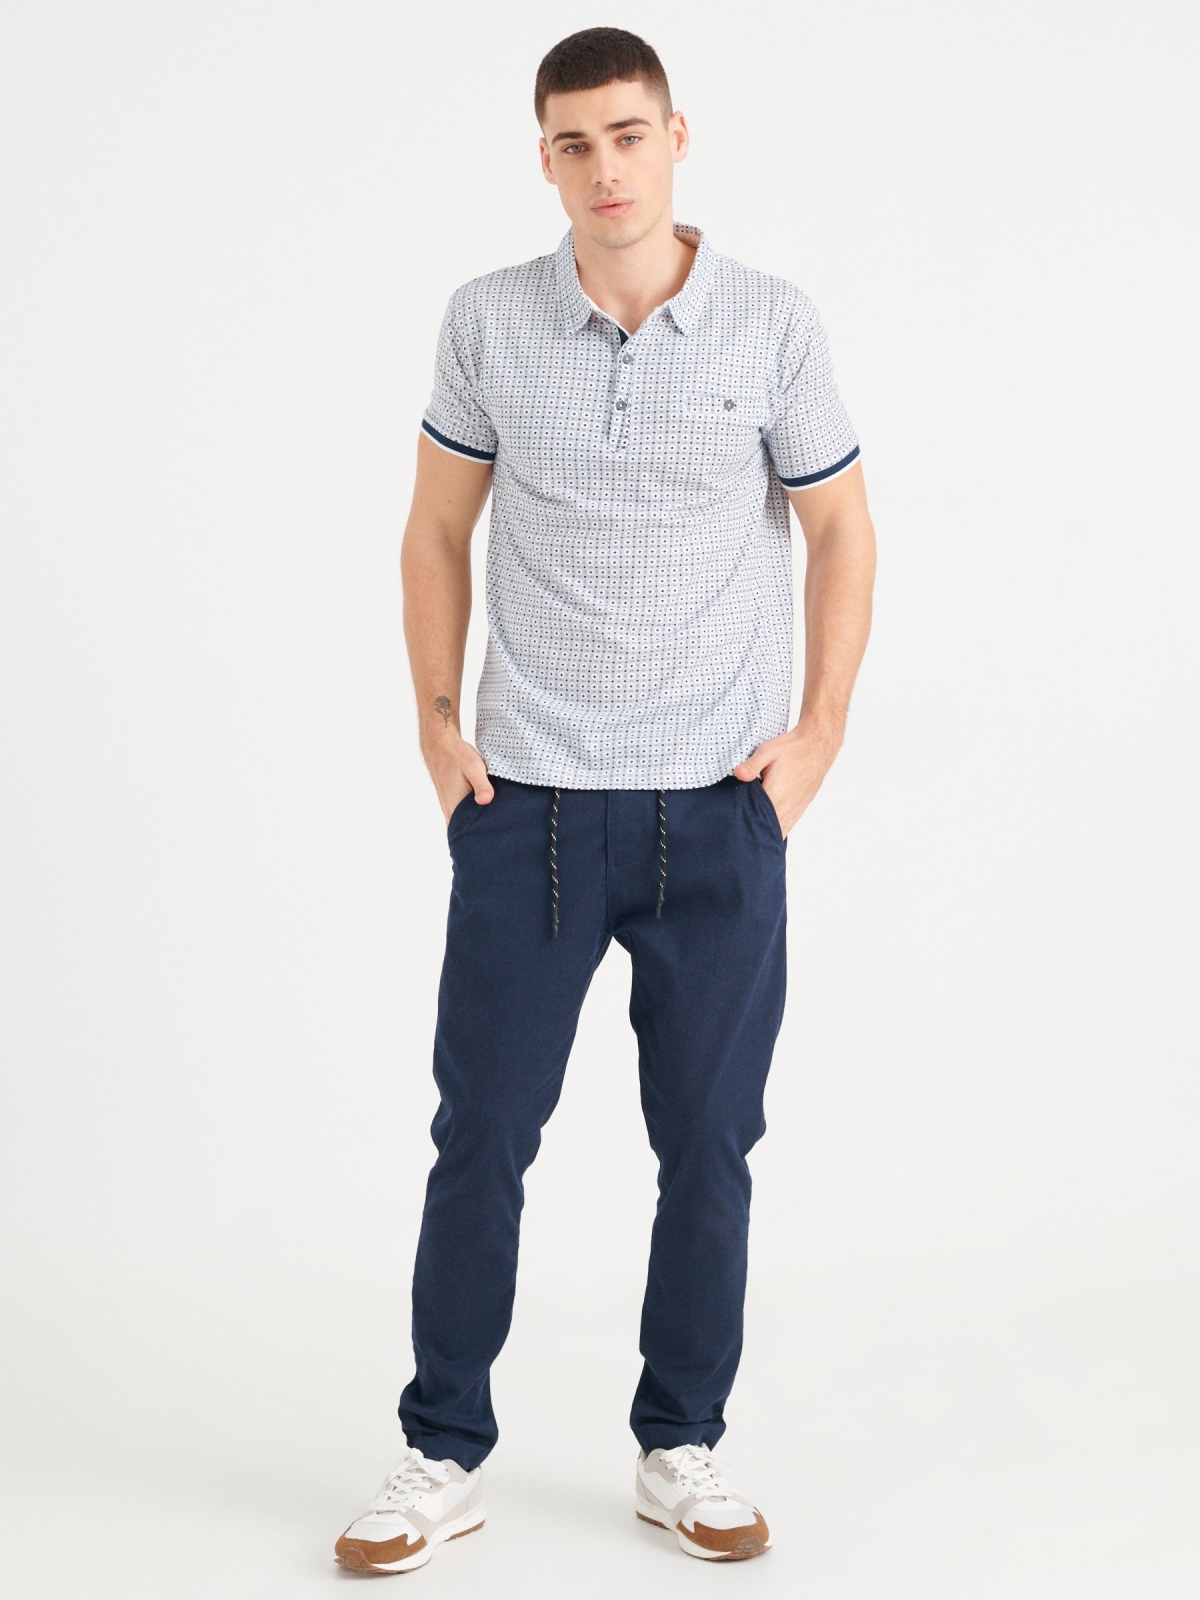 Jacquard polo shirt with pocket navy front view